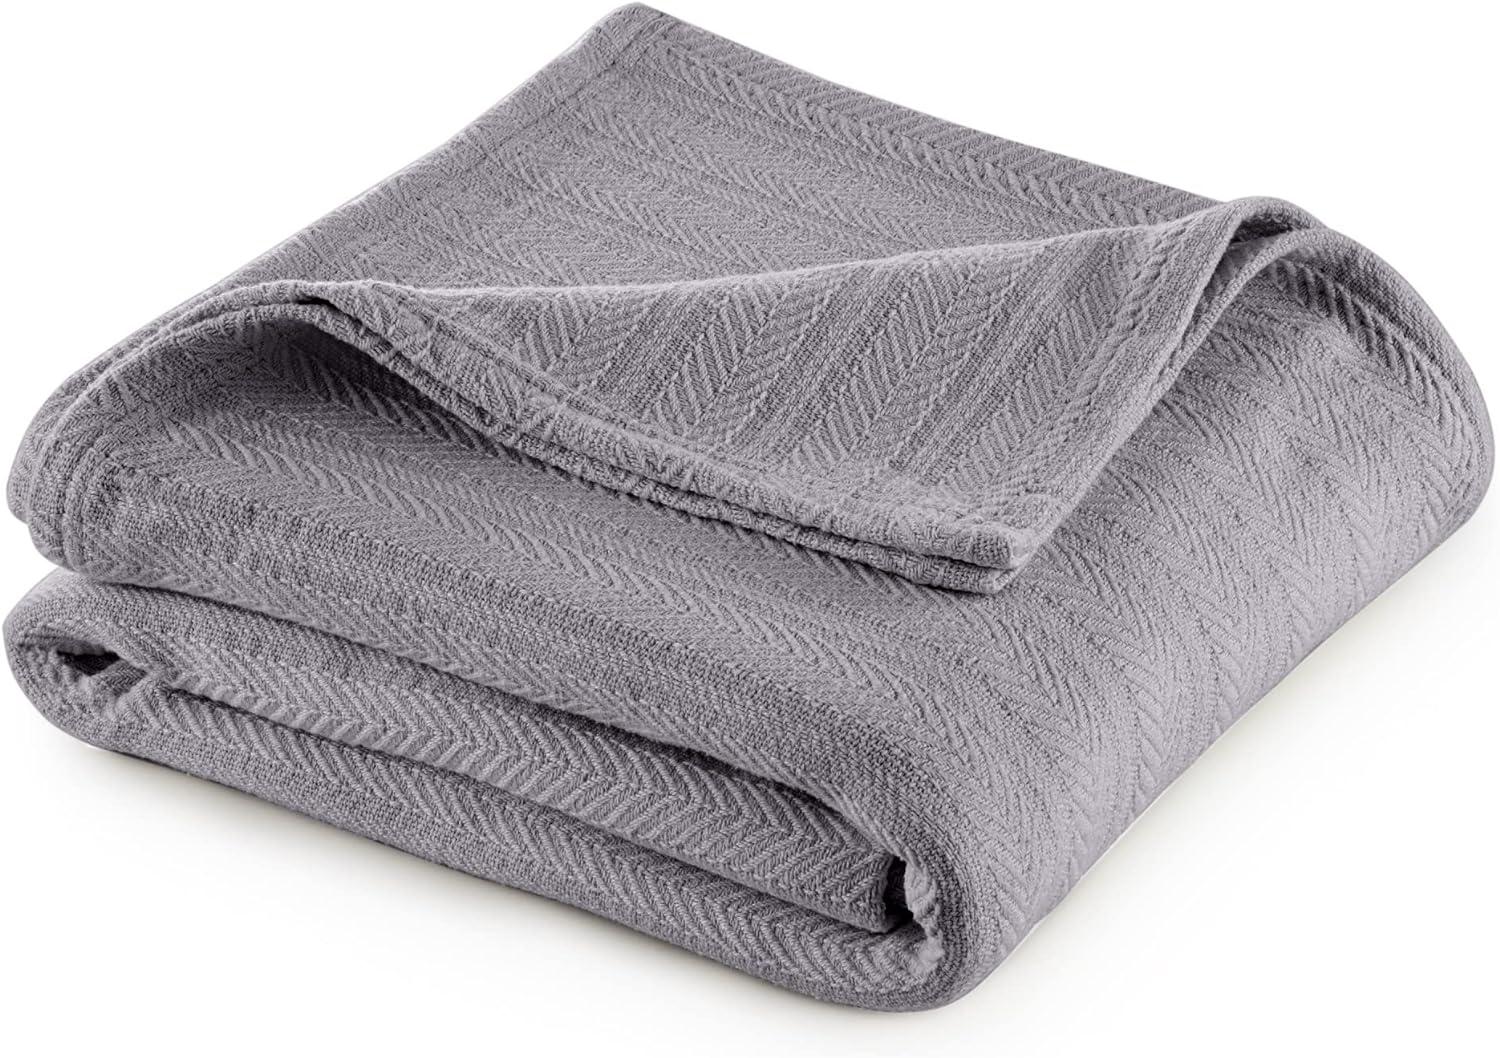 Luxurious Chevron Cotton Full/Queen Blanket - Soft & Breathable